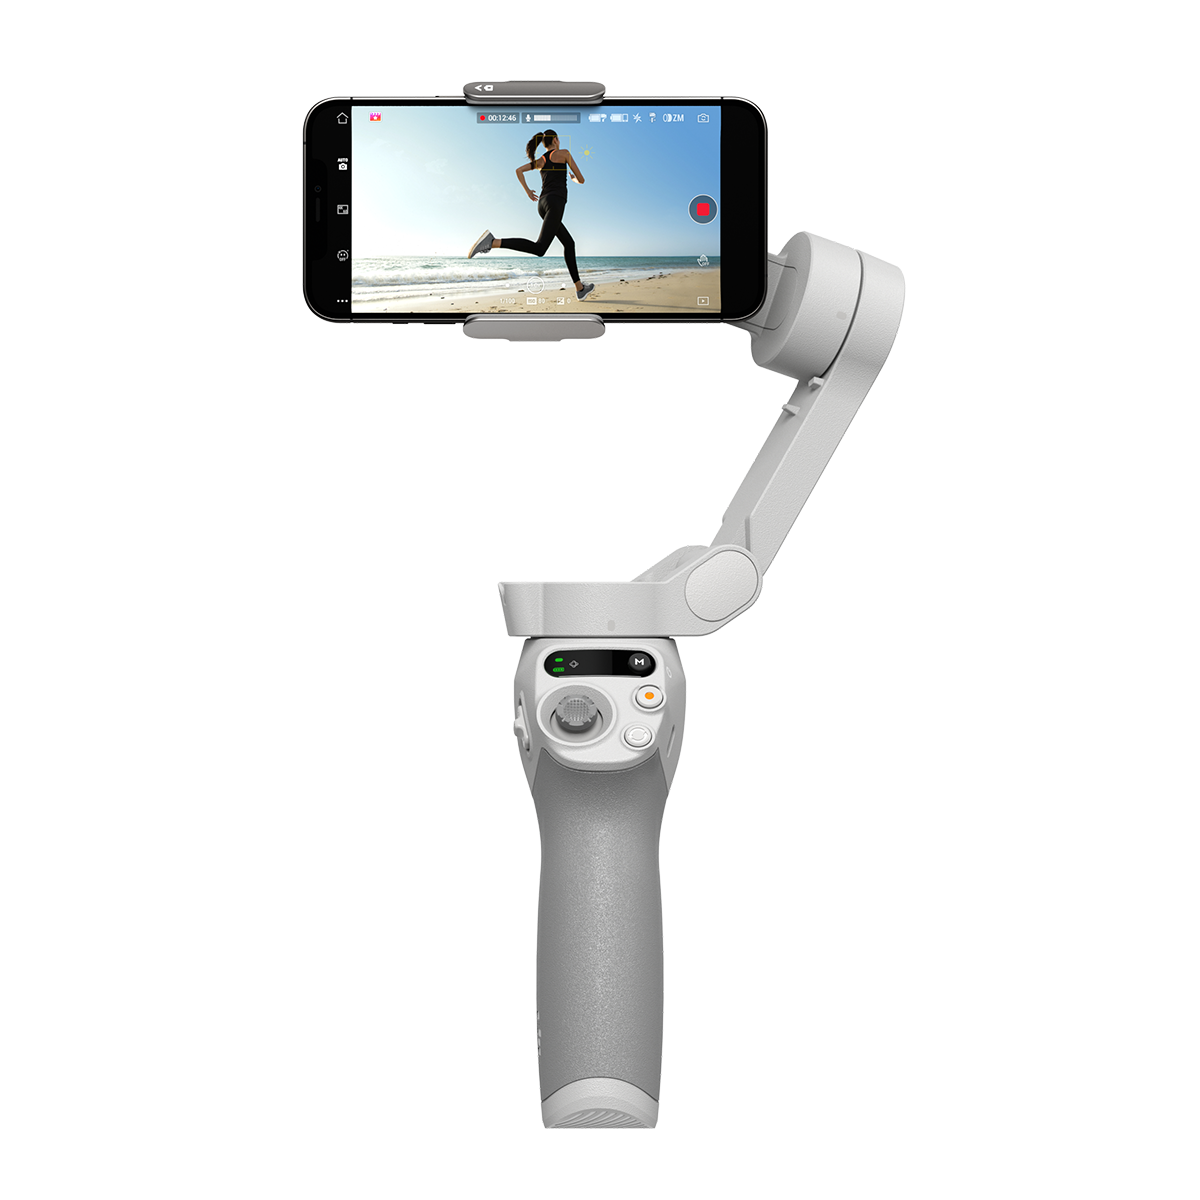 DJI Osmo Mobile SE Smartphone Gimbal Stabilizer Android & IOS for Vlog